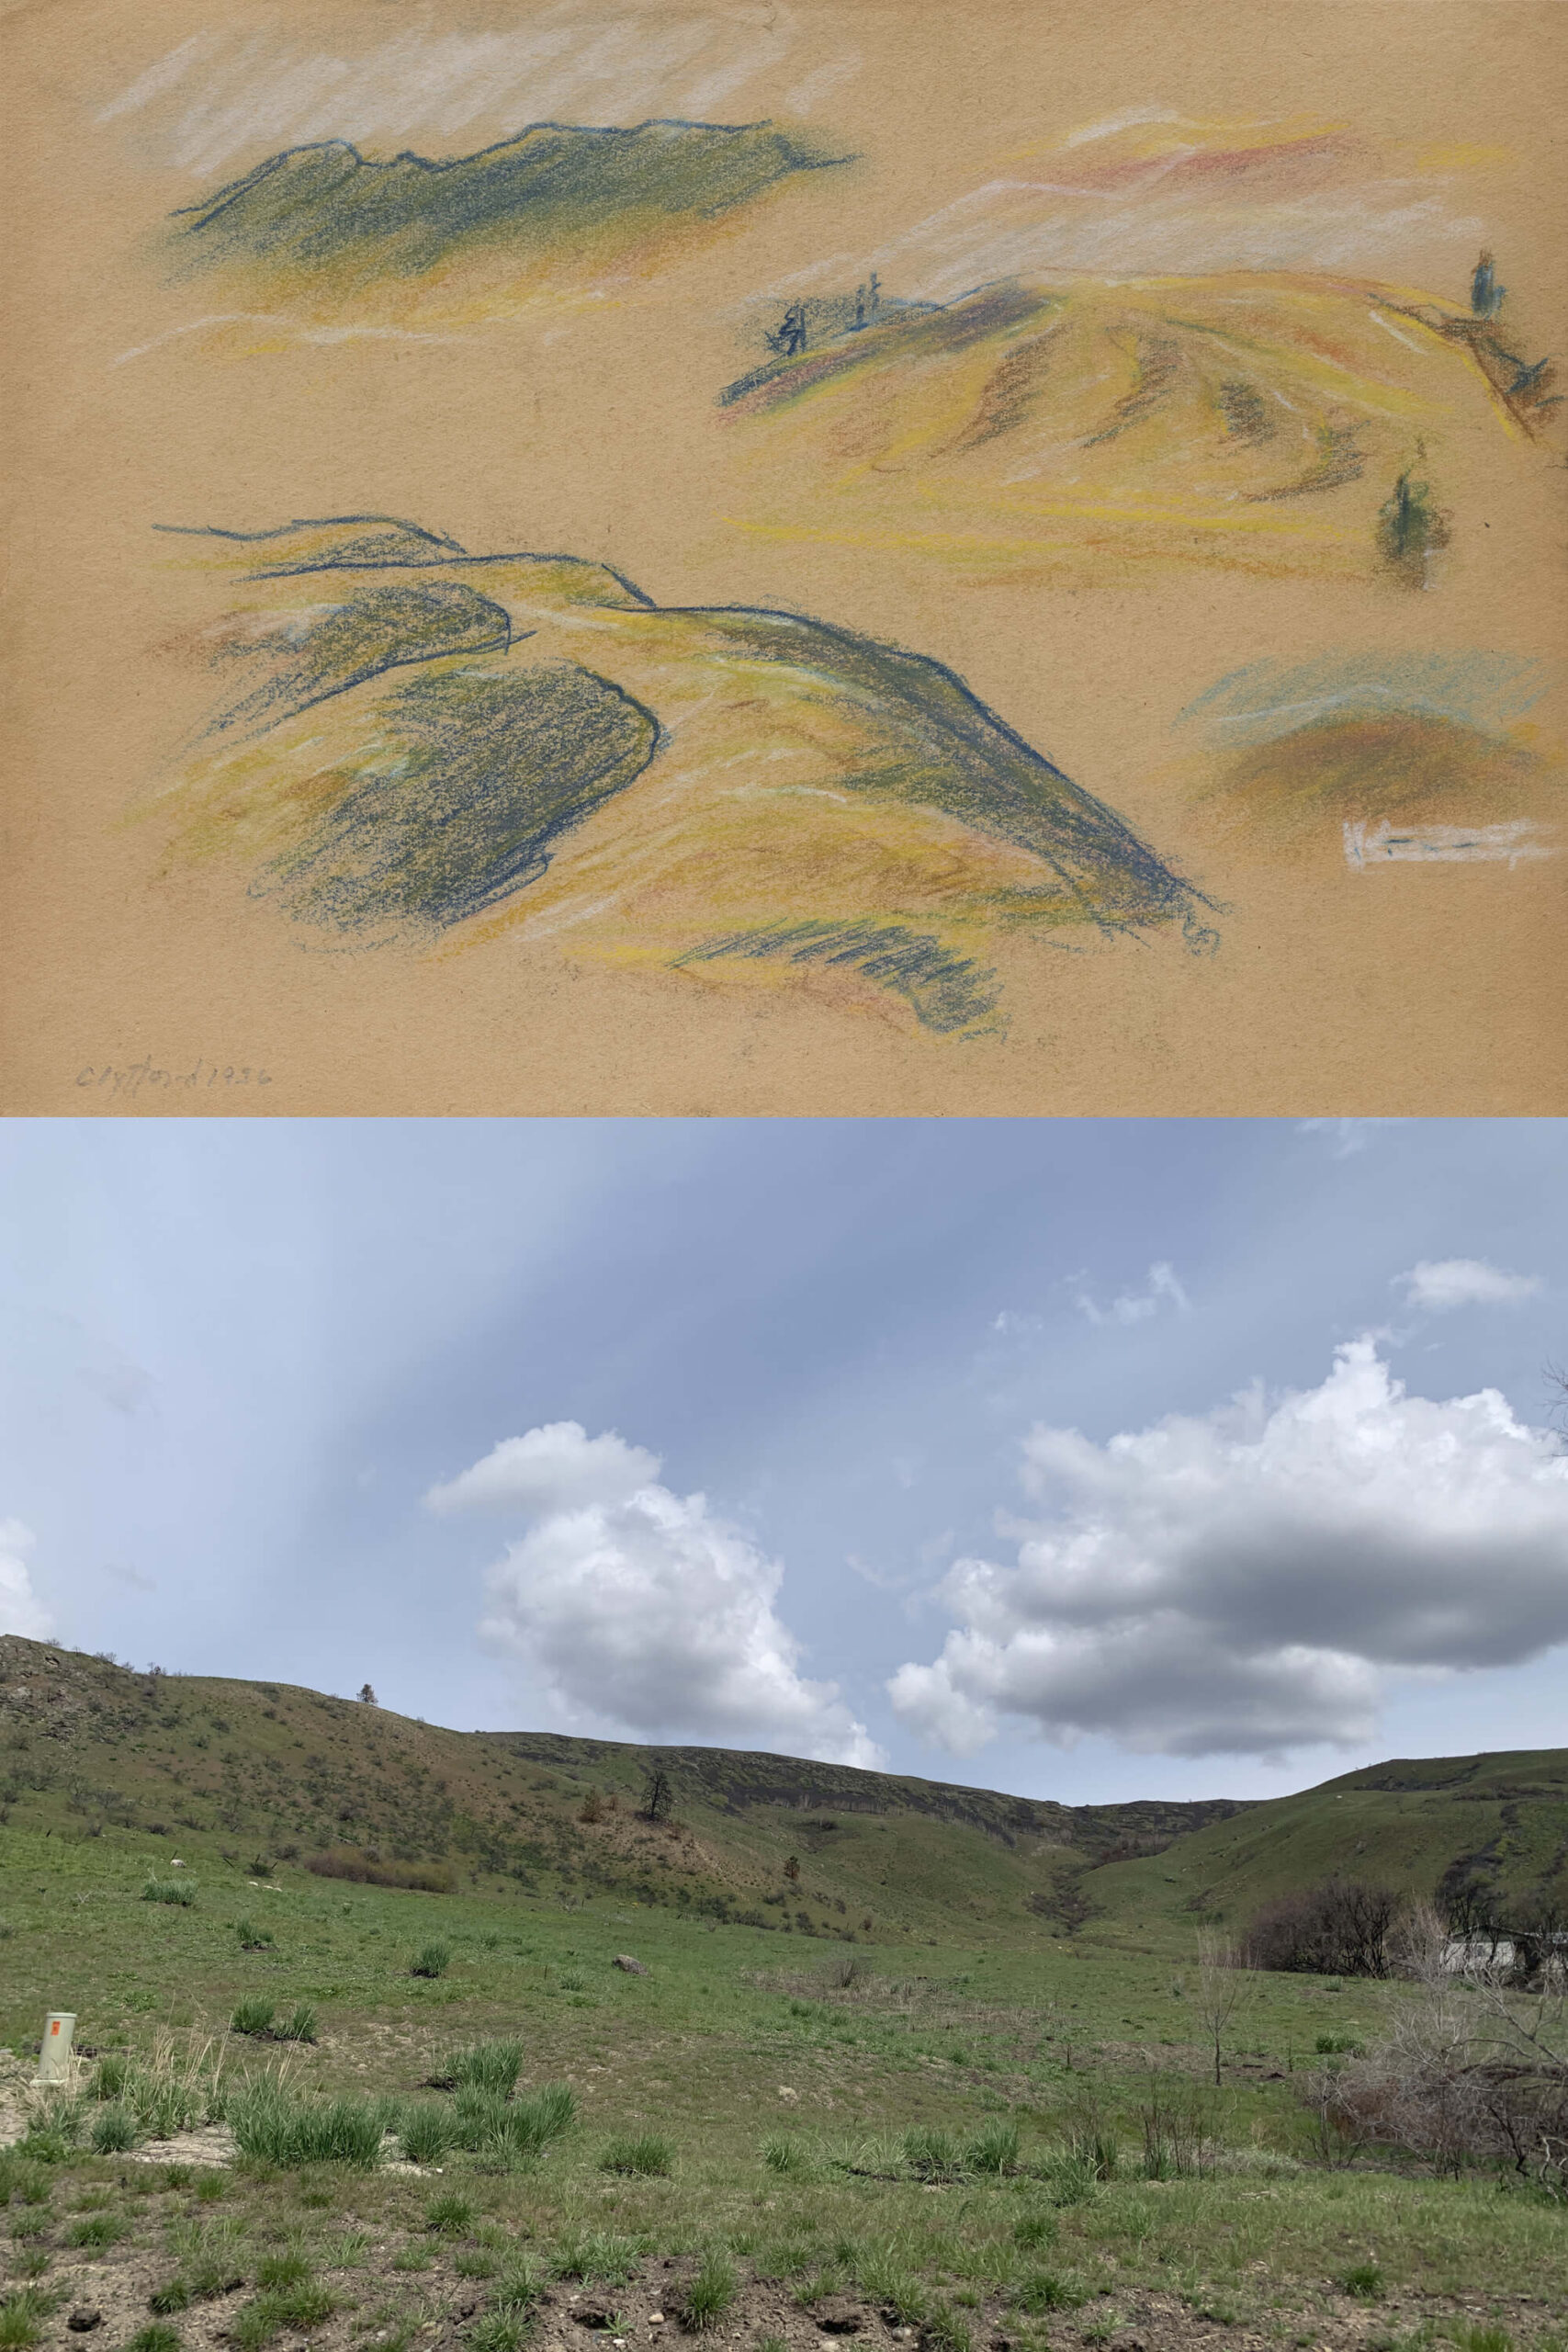 Pastel on paper sketch of rolling hillsides on top of a color taken from the same location